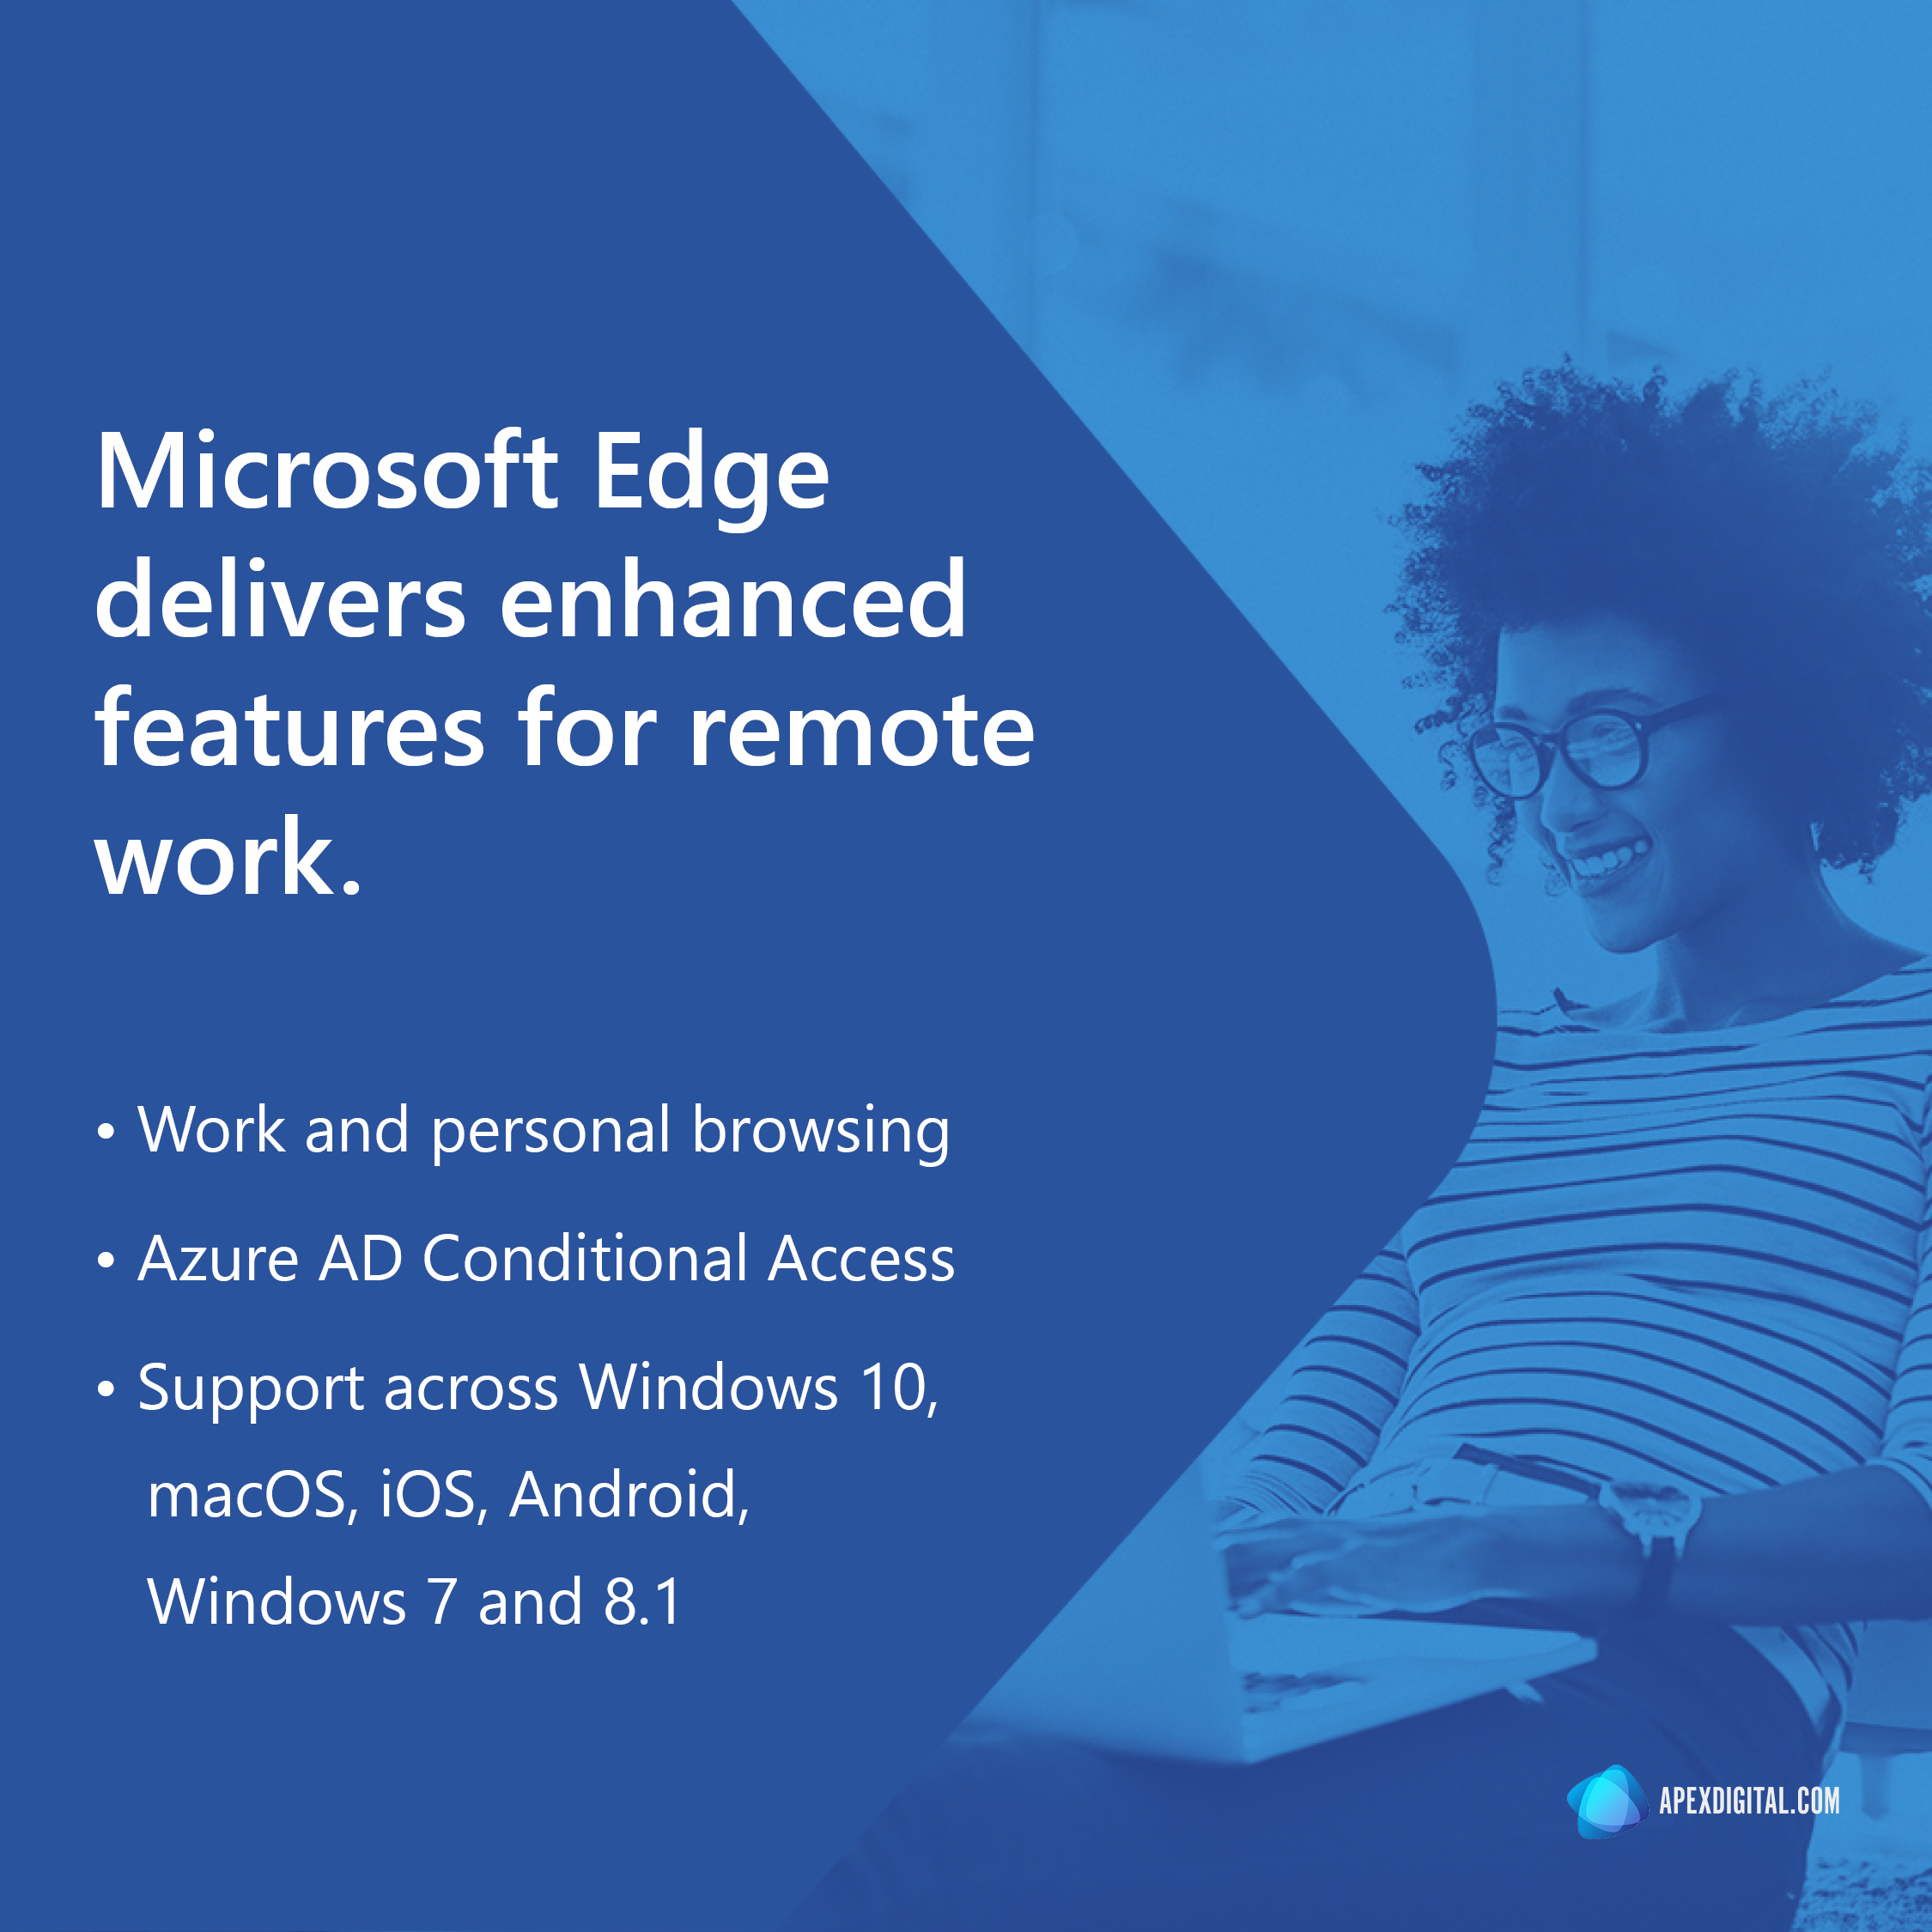 Microsoft Edge delivers enhanced features for remote work